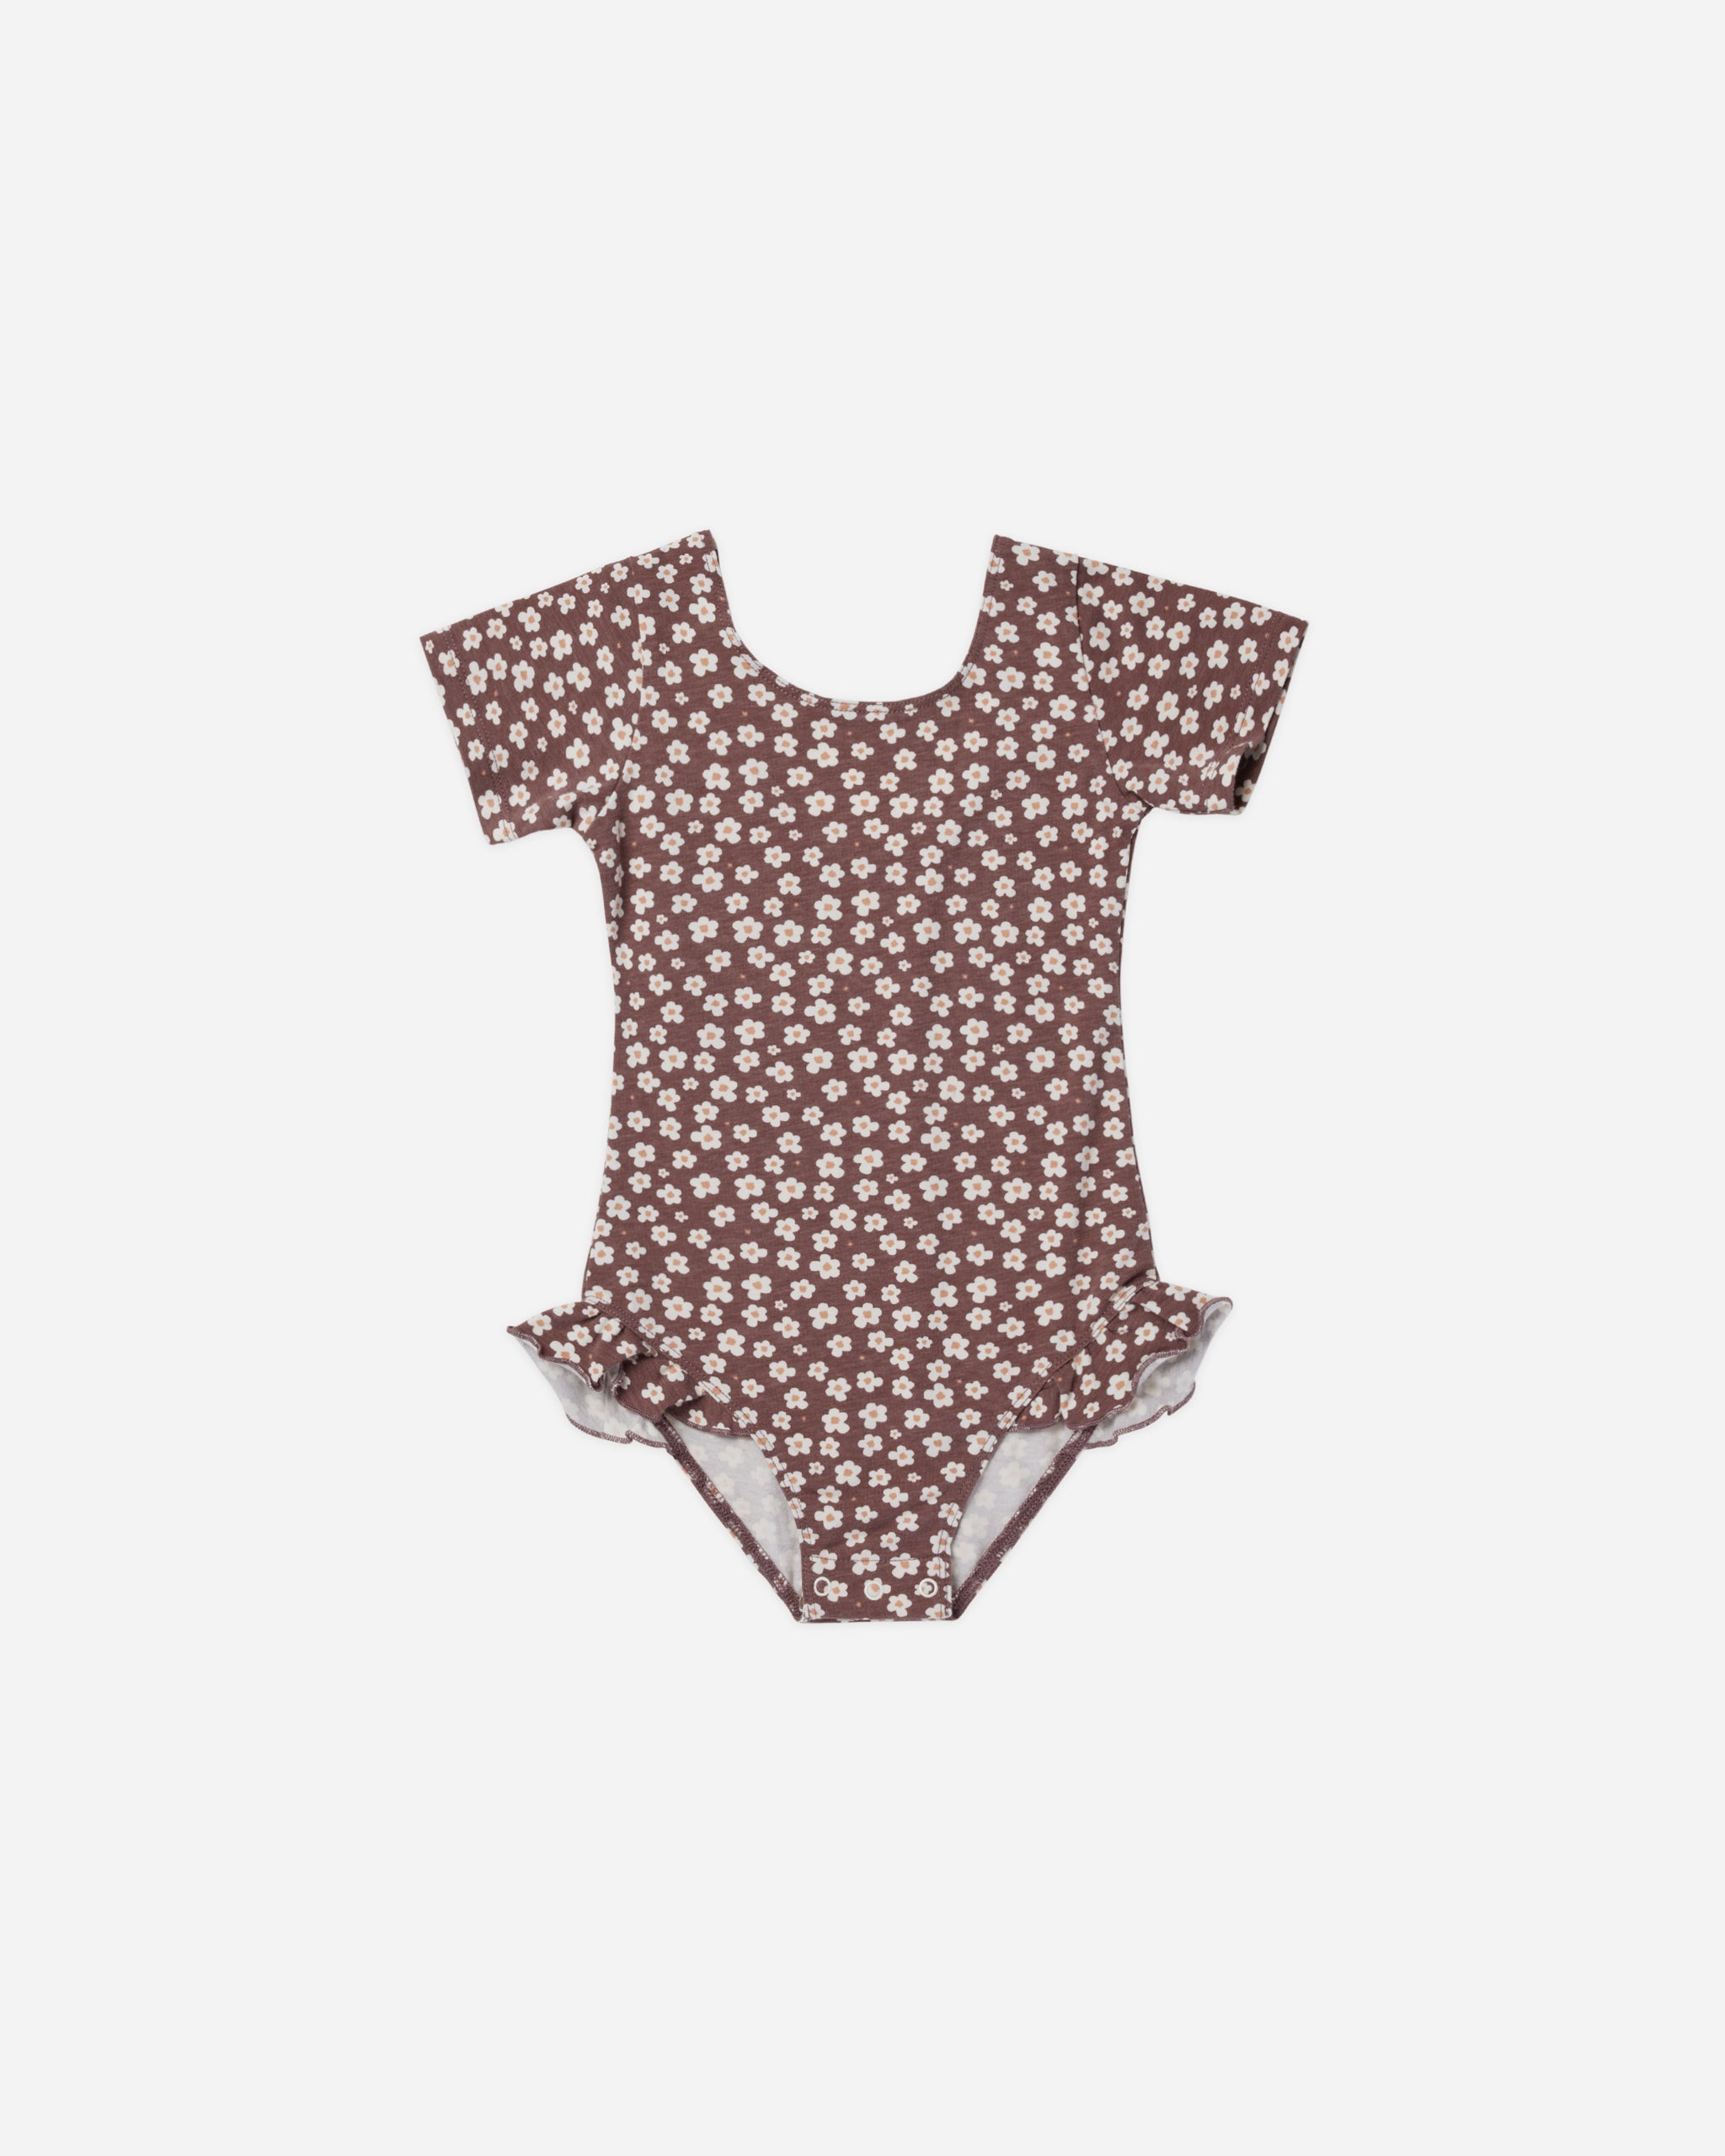 Leotard || Plum Ditsy - Rylee + Cru | Kids Clothes | Trendy Baby Clothes | Modern Infant Outfits |